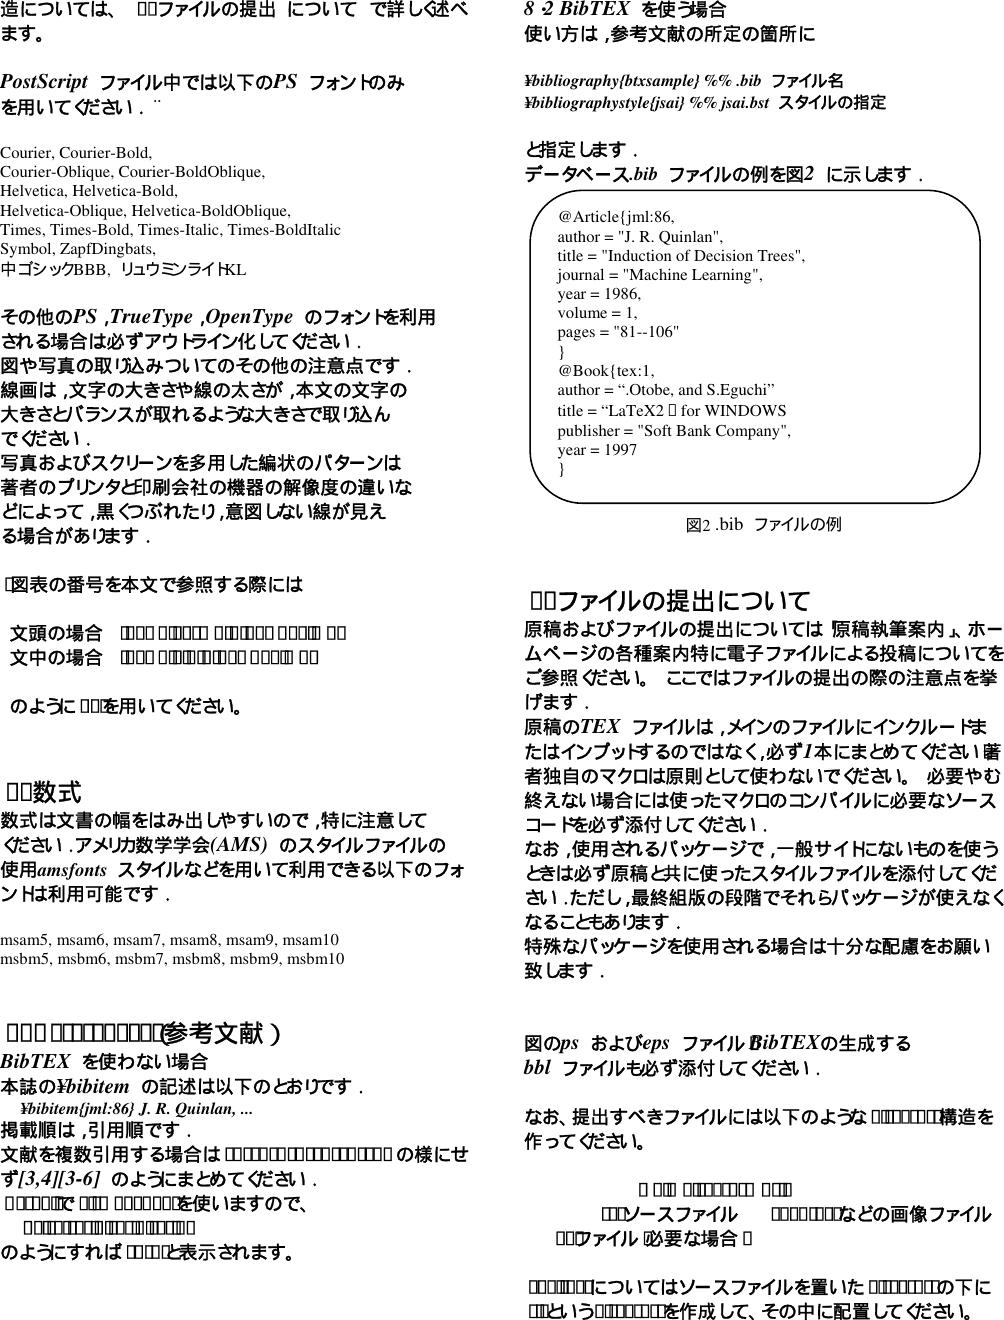 Page 3 of 3 - Tex Manual Japanese